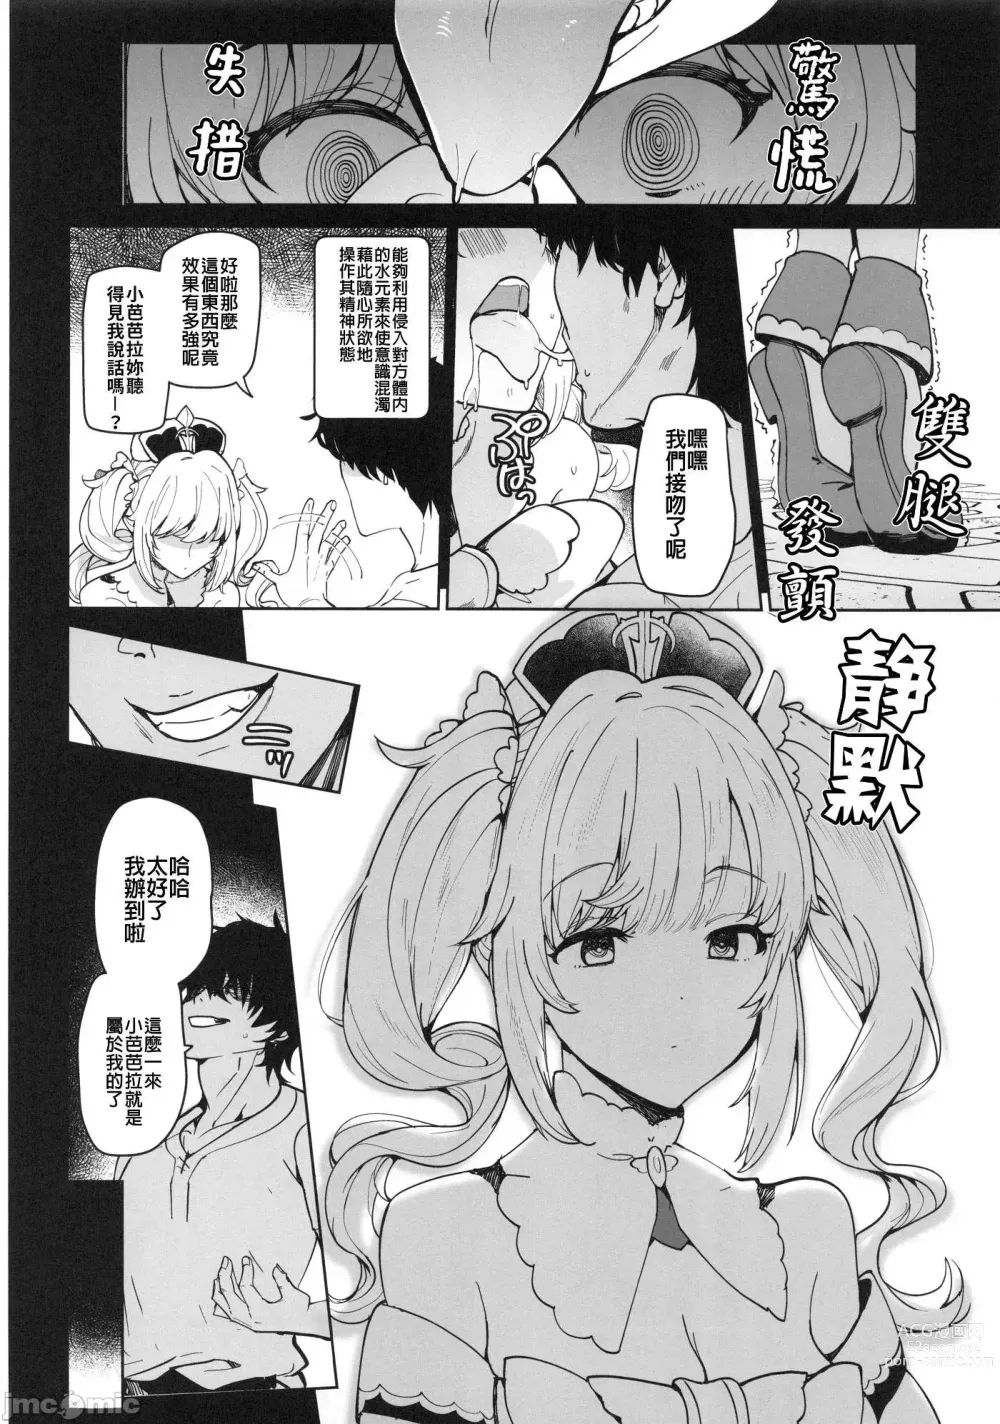 Page 5 of doujinshi 芭芭拉 入眠